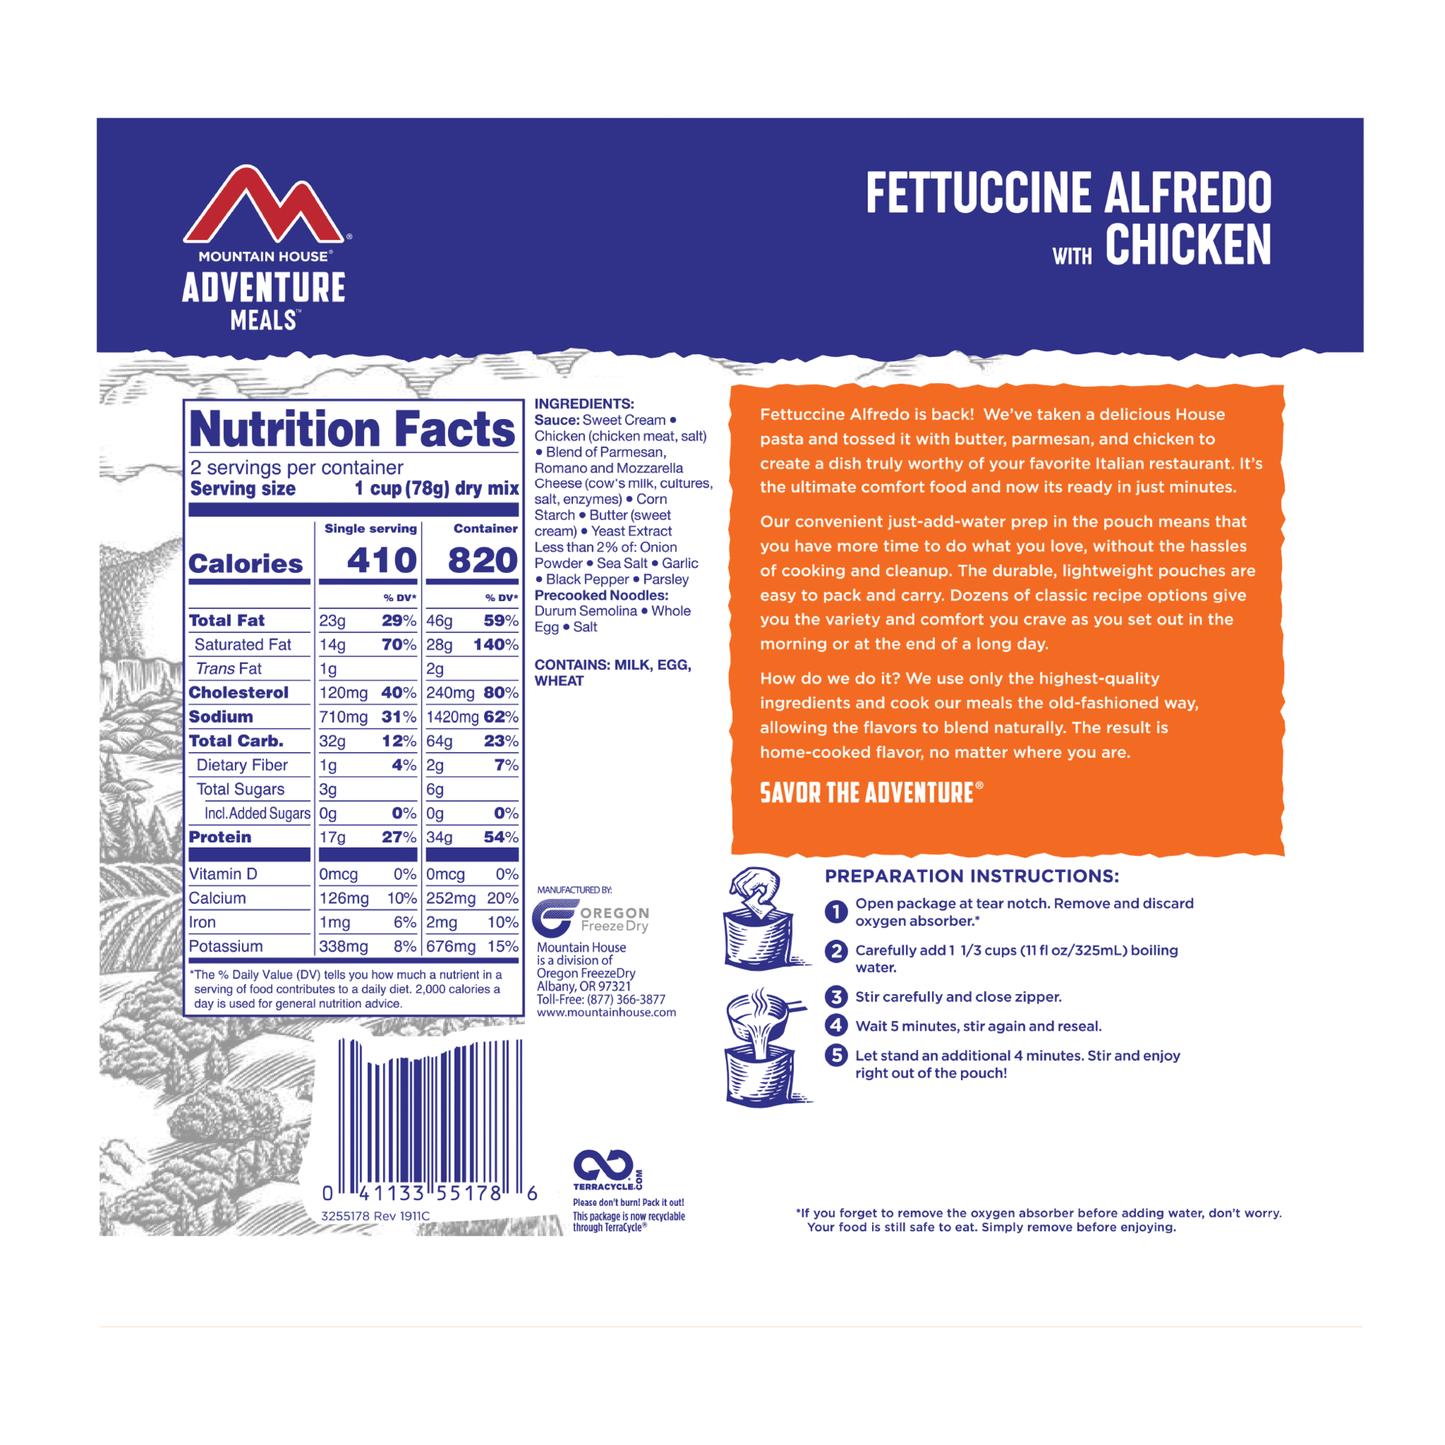 Mountain house Fettuccine Alfredo with Chicken On sale